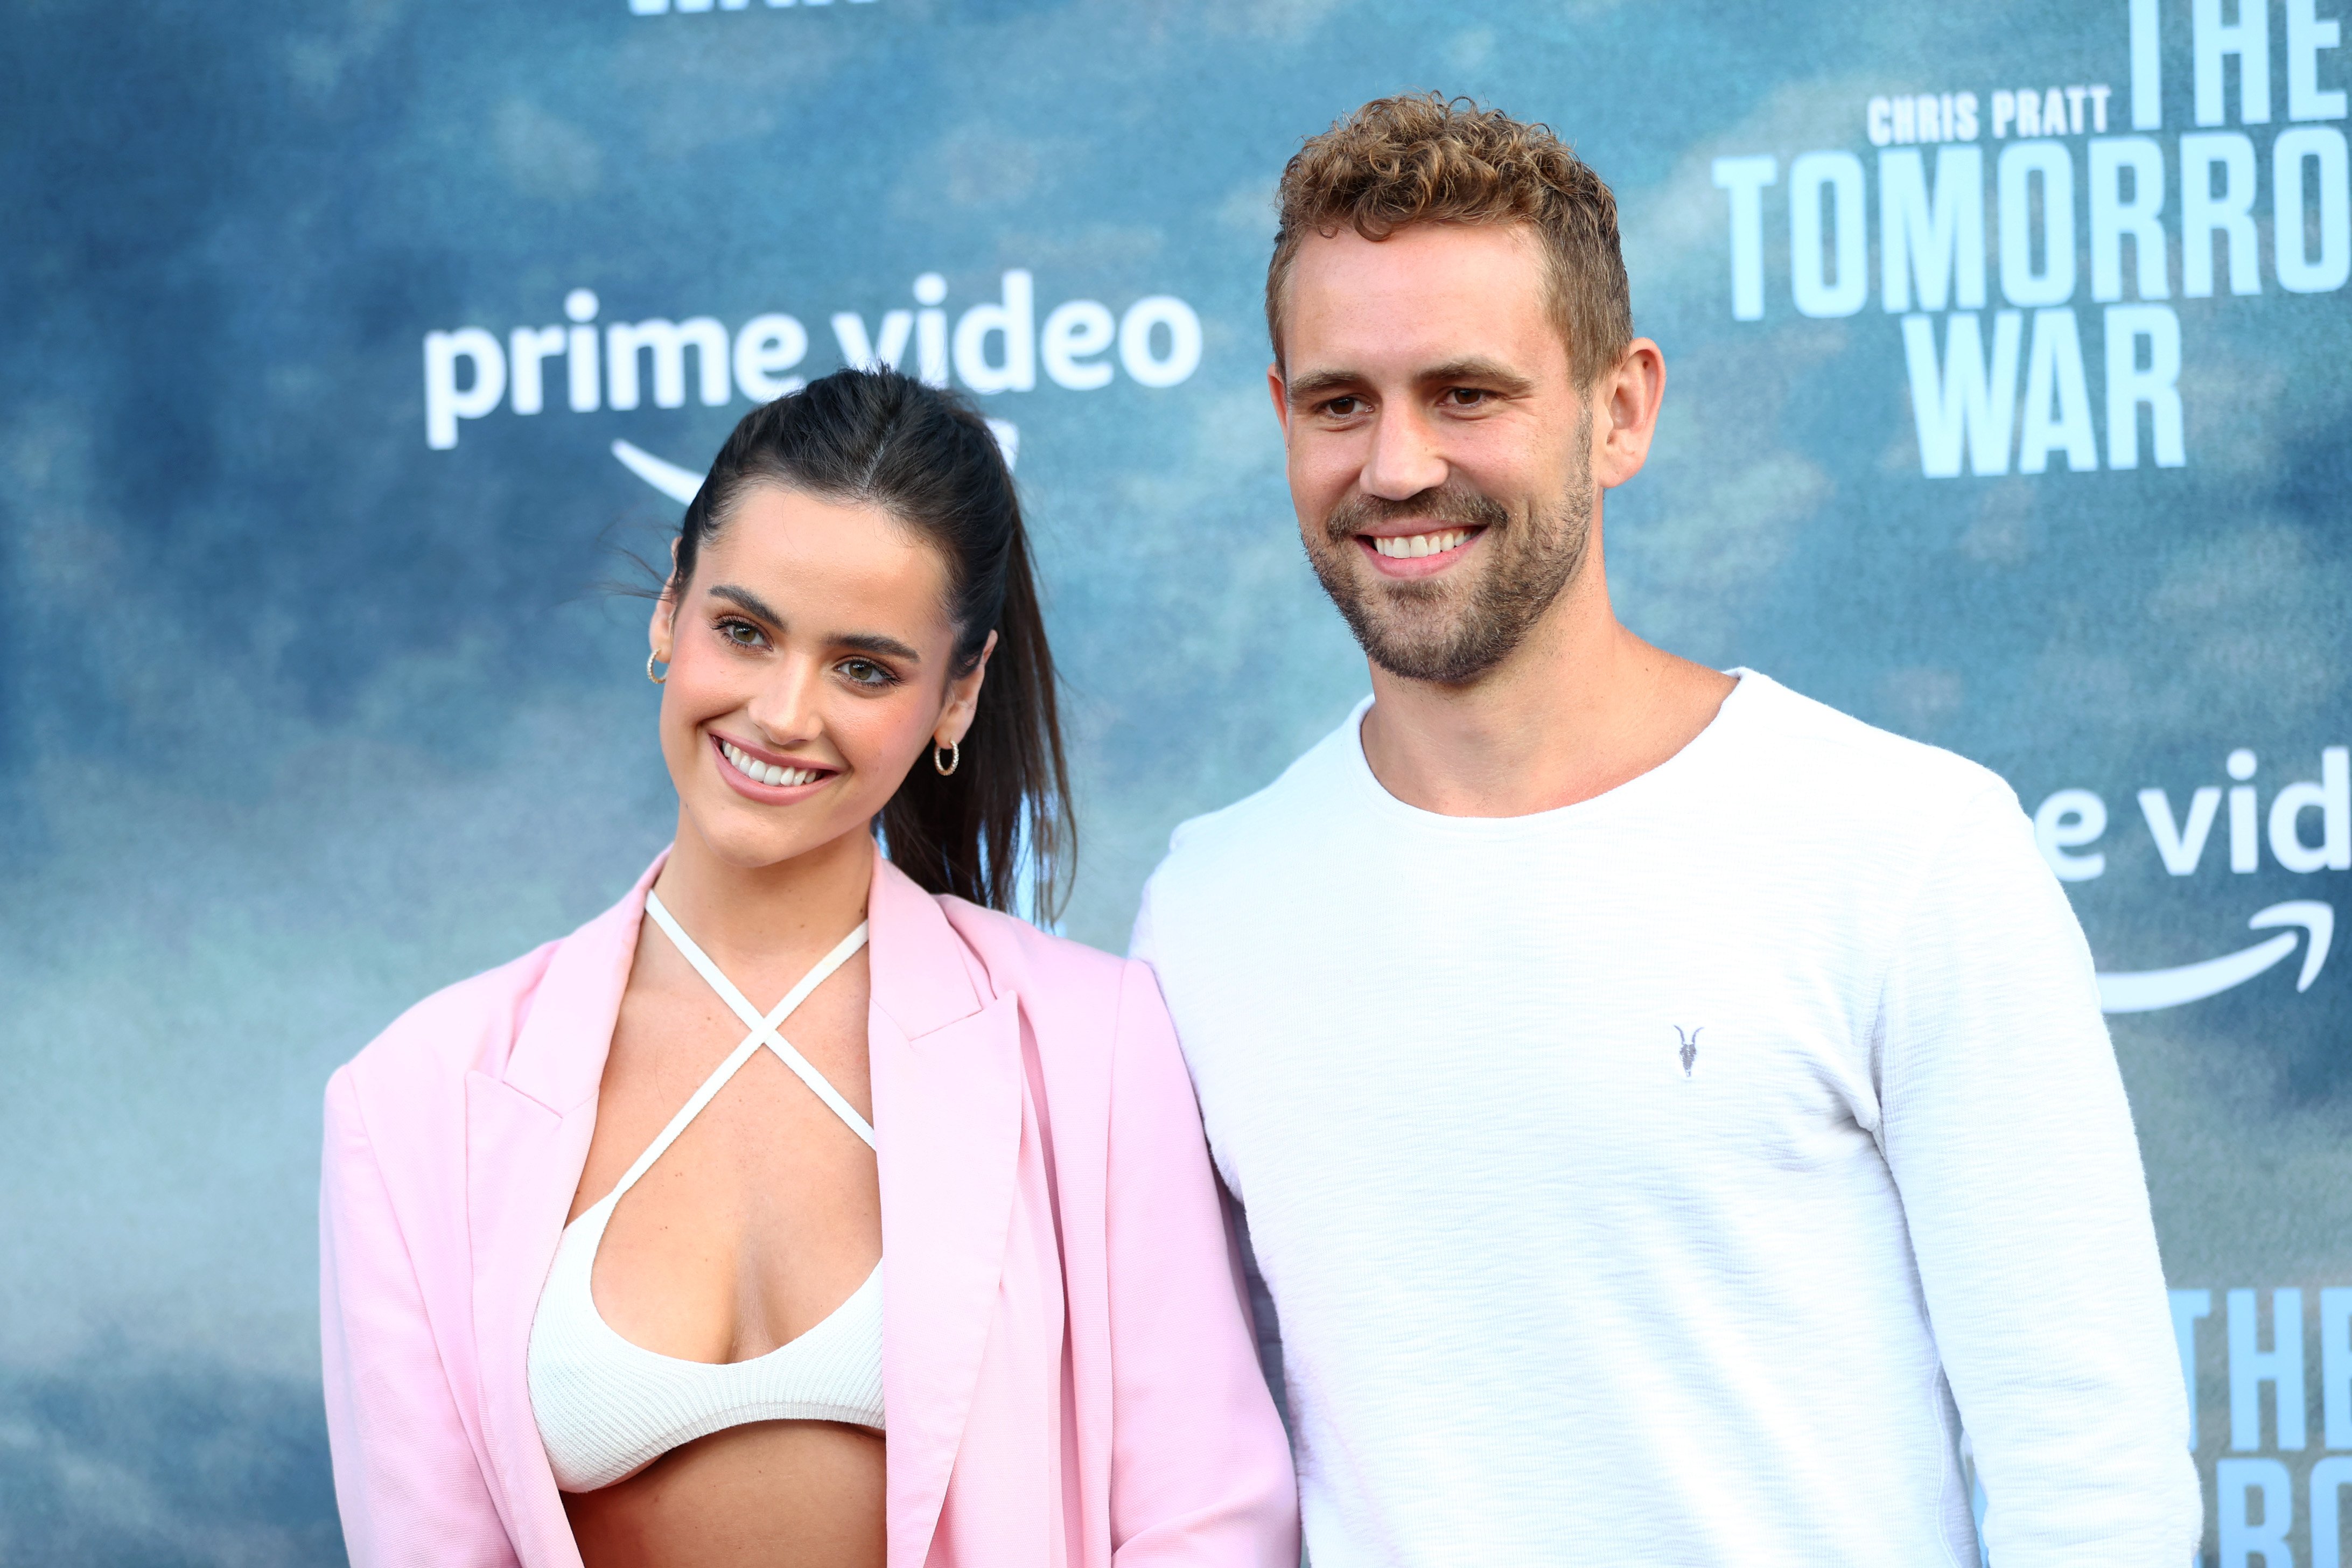 Natalie Joy and Nick Viall pose for photos in Los Angeles for the premiere of "The Tomorrow War."